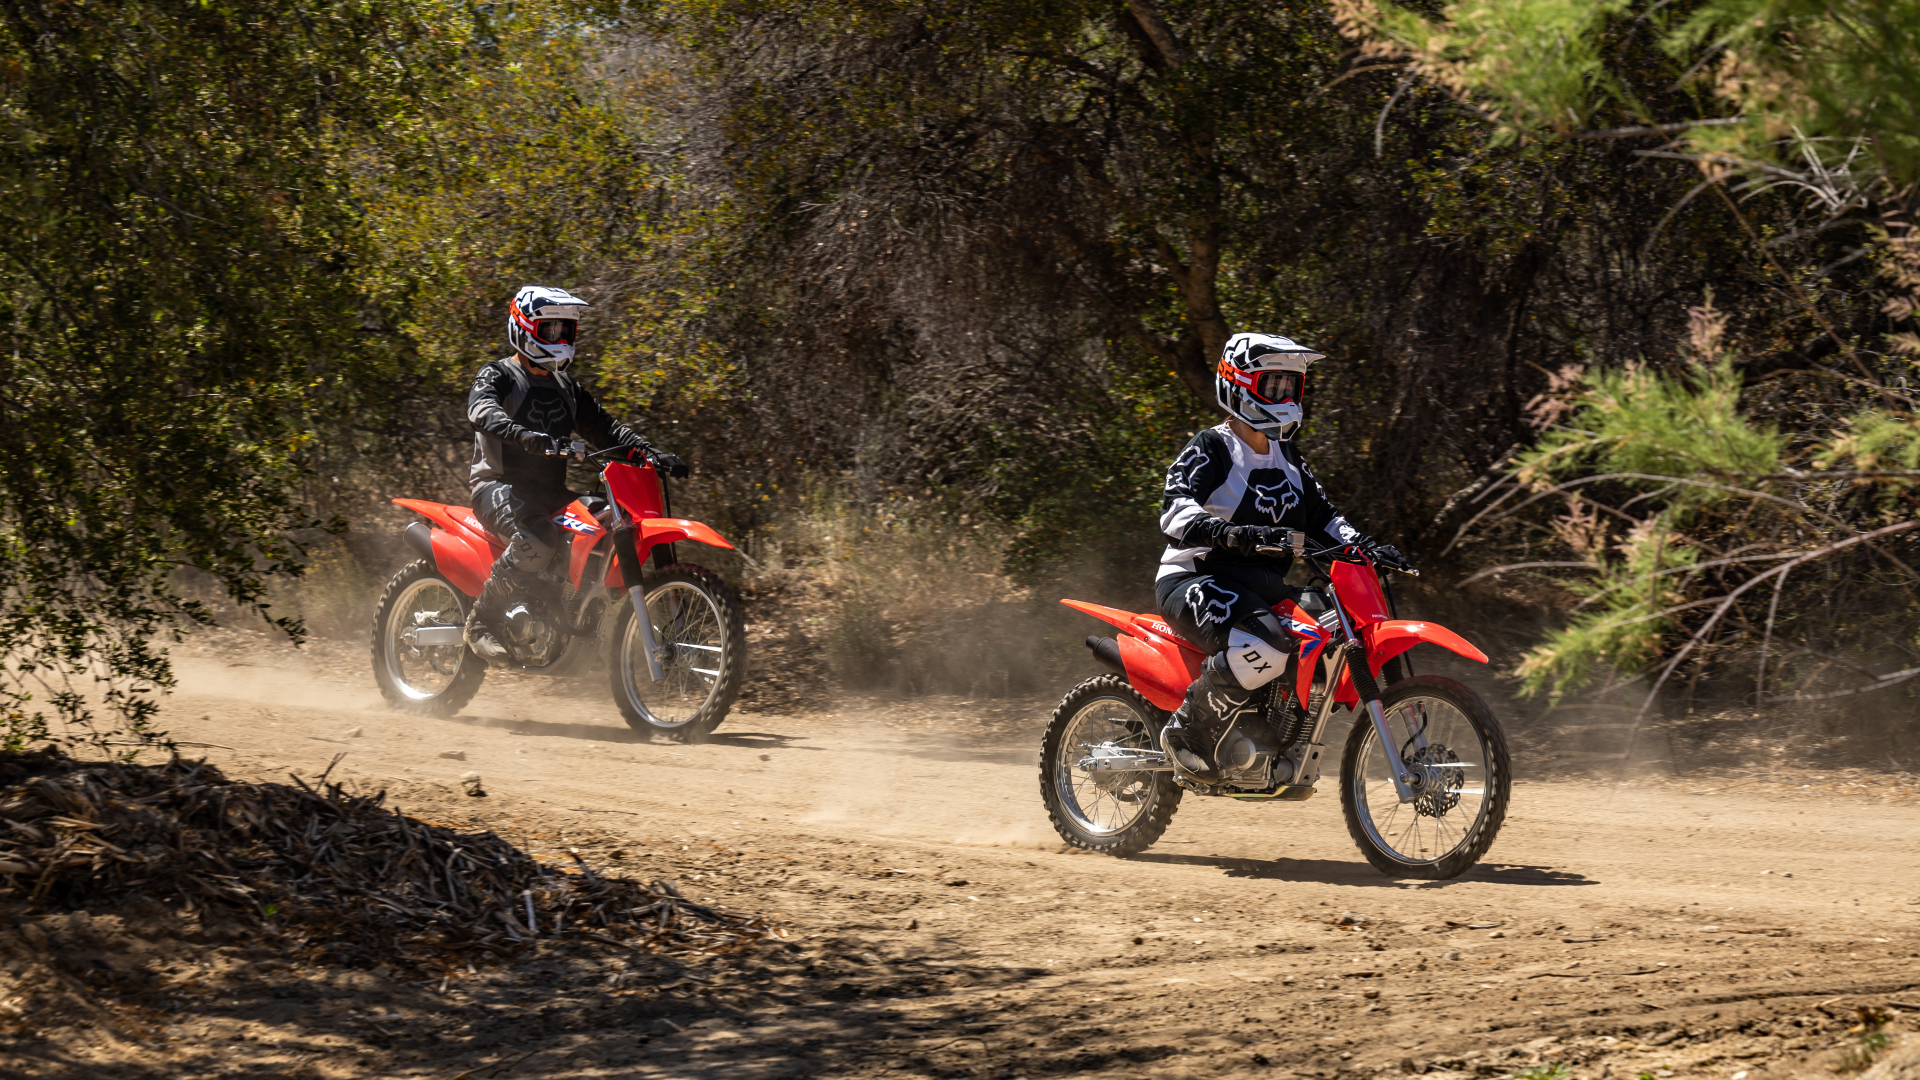 Two Beginner Riders On Honda CRF125Fs Riding On A Trail